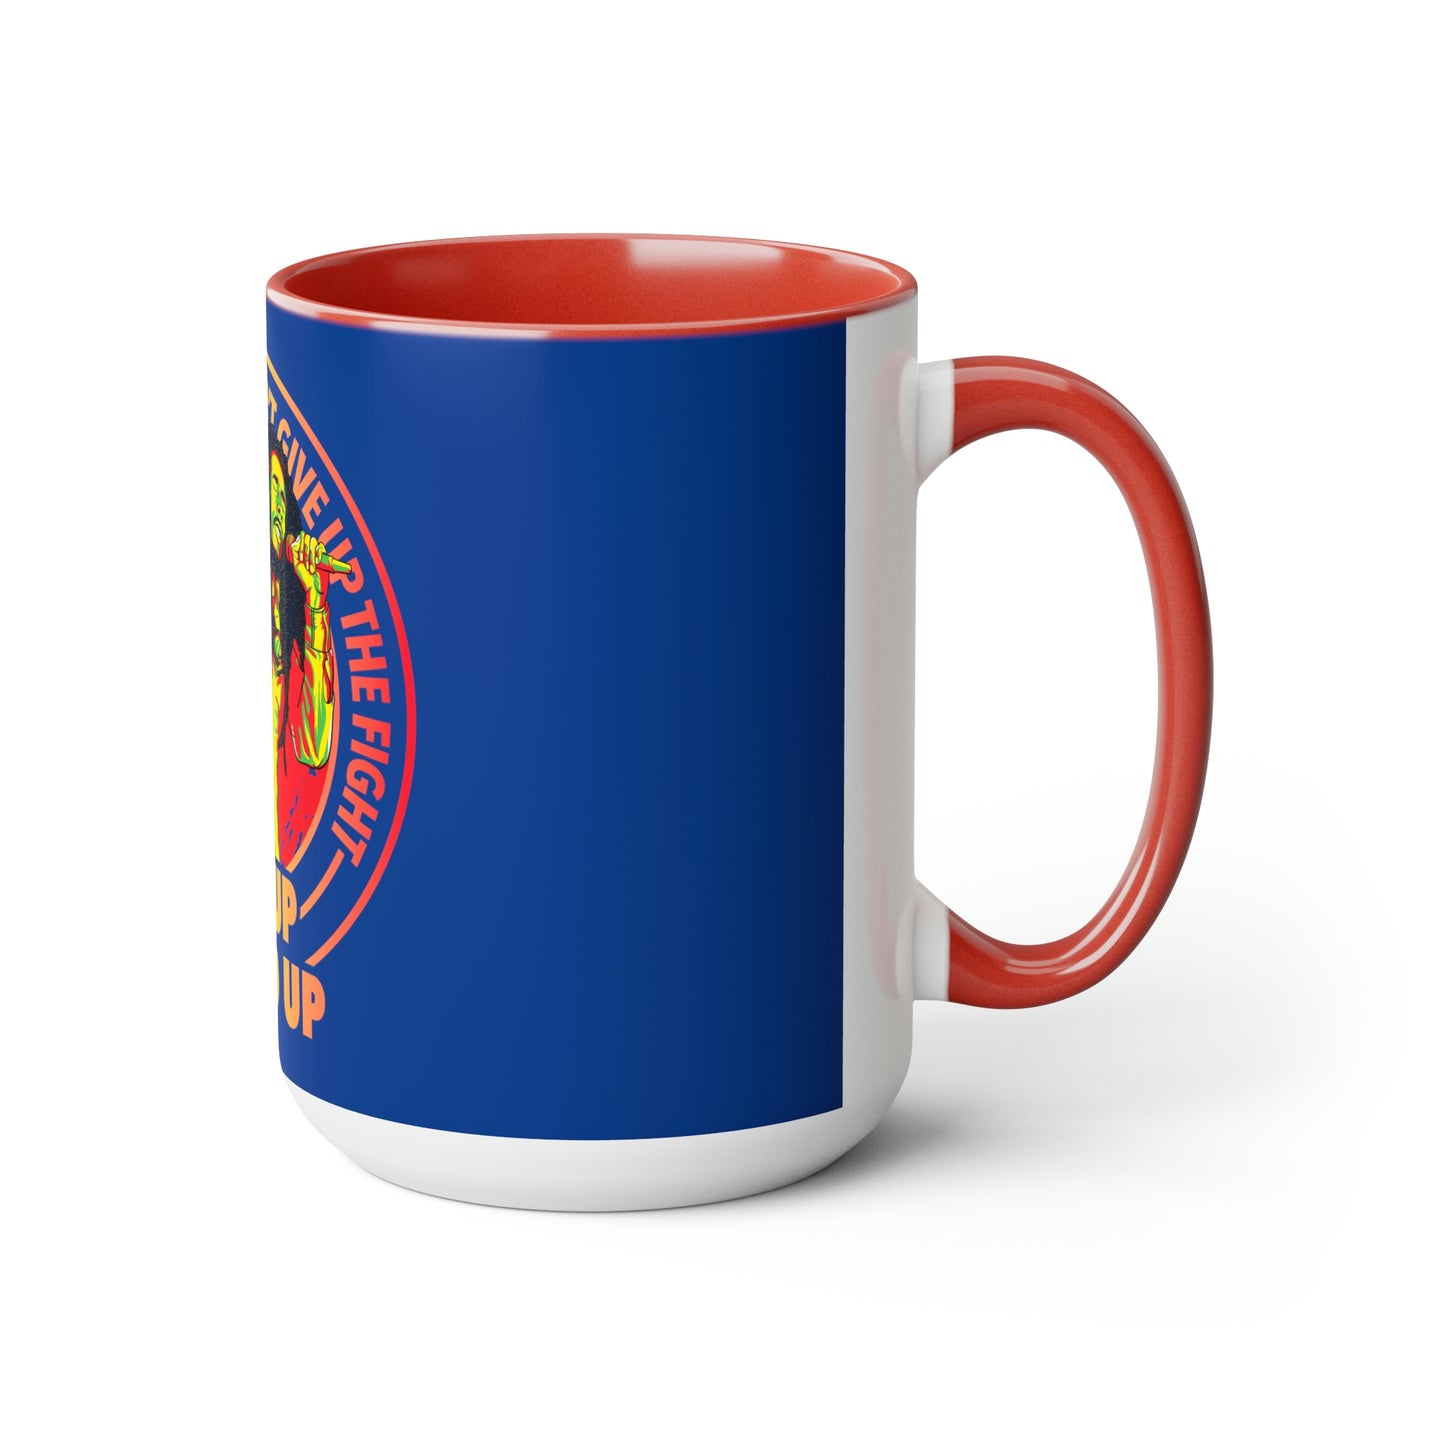 Get Up Stand Up Accented Coffee Mugs, 15oz